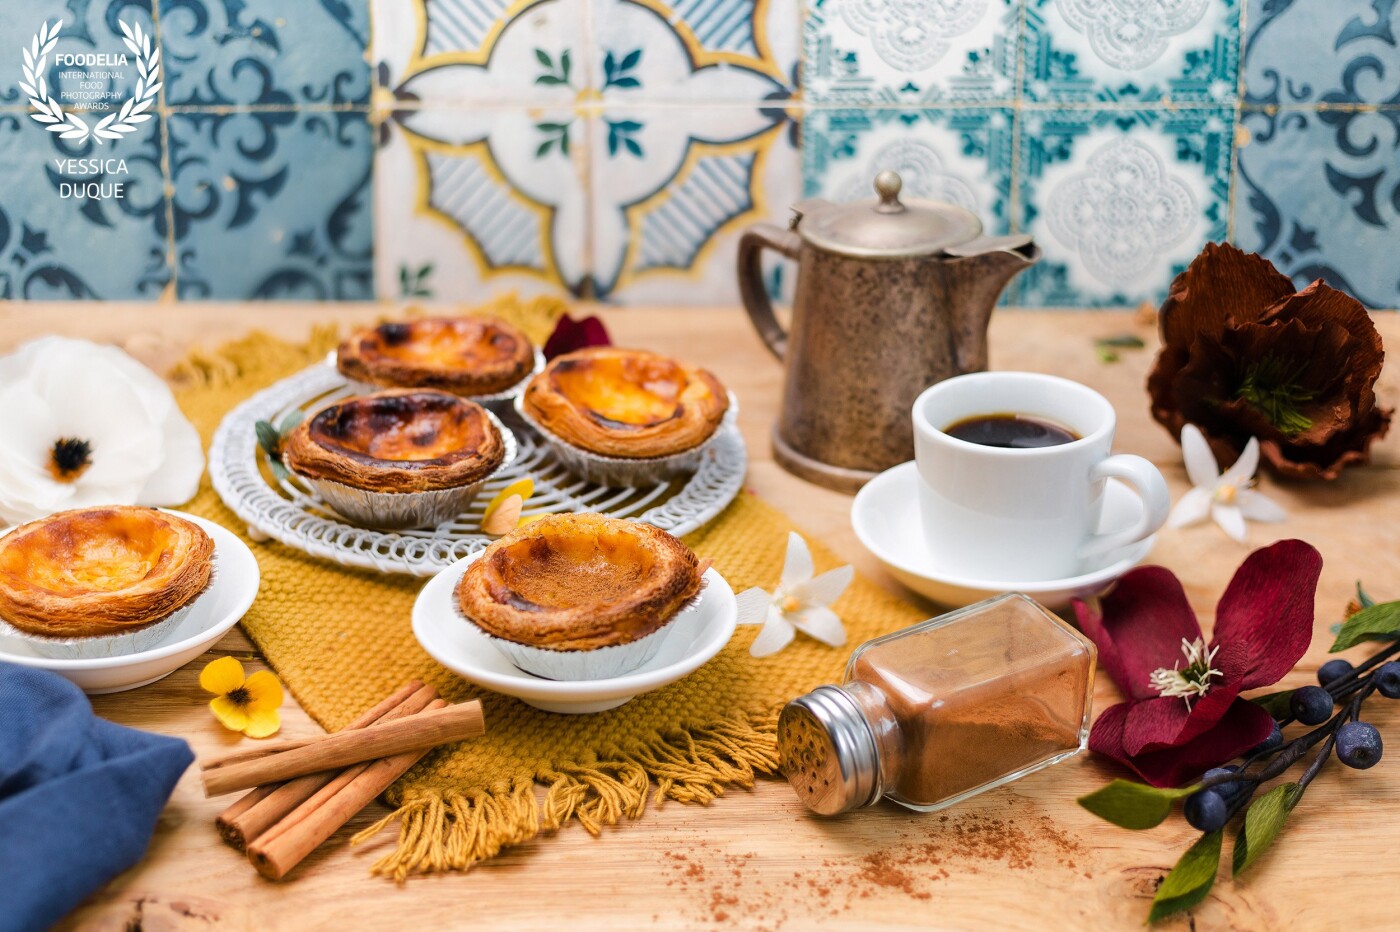 Pastéis de Nata<br />
Feeling inspired by Portuguese vibes and these delicious tartlets recommended by my favorite Portuguese shop in Leidschendam @marqasa.nl; handmade paper flowers made by the incredible artist @anoukbohmer definitely compliment the mood and brings me back to any cozy coffee place in Lisbon.<br />
Camera: Canon 5D Mark III<br />
Lens: 50 mm <br />
Settings: ƒ/2.8 1/125 ISO100 daylight